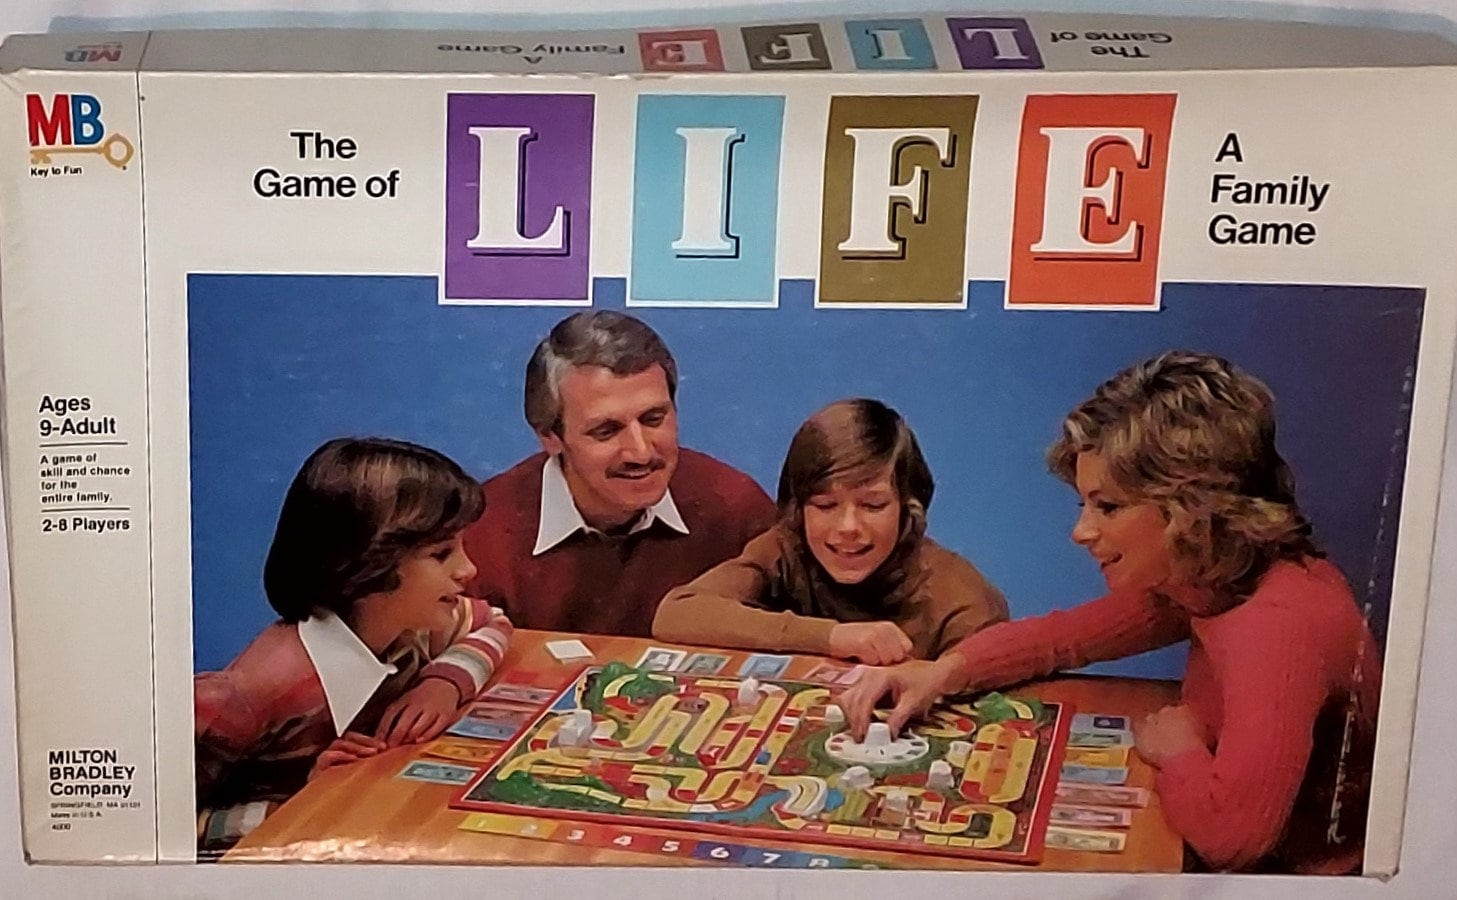 What's In That Game Box? – The Game of Life (1977)